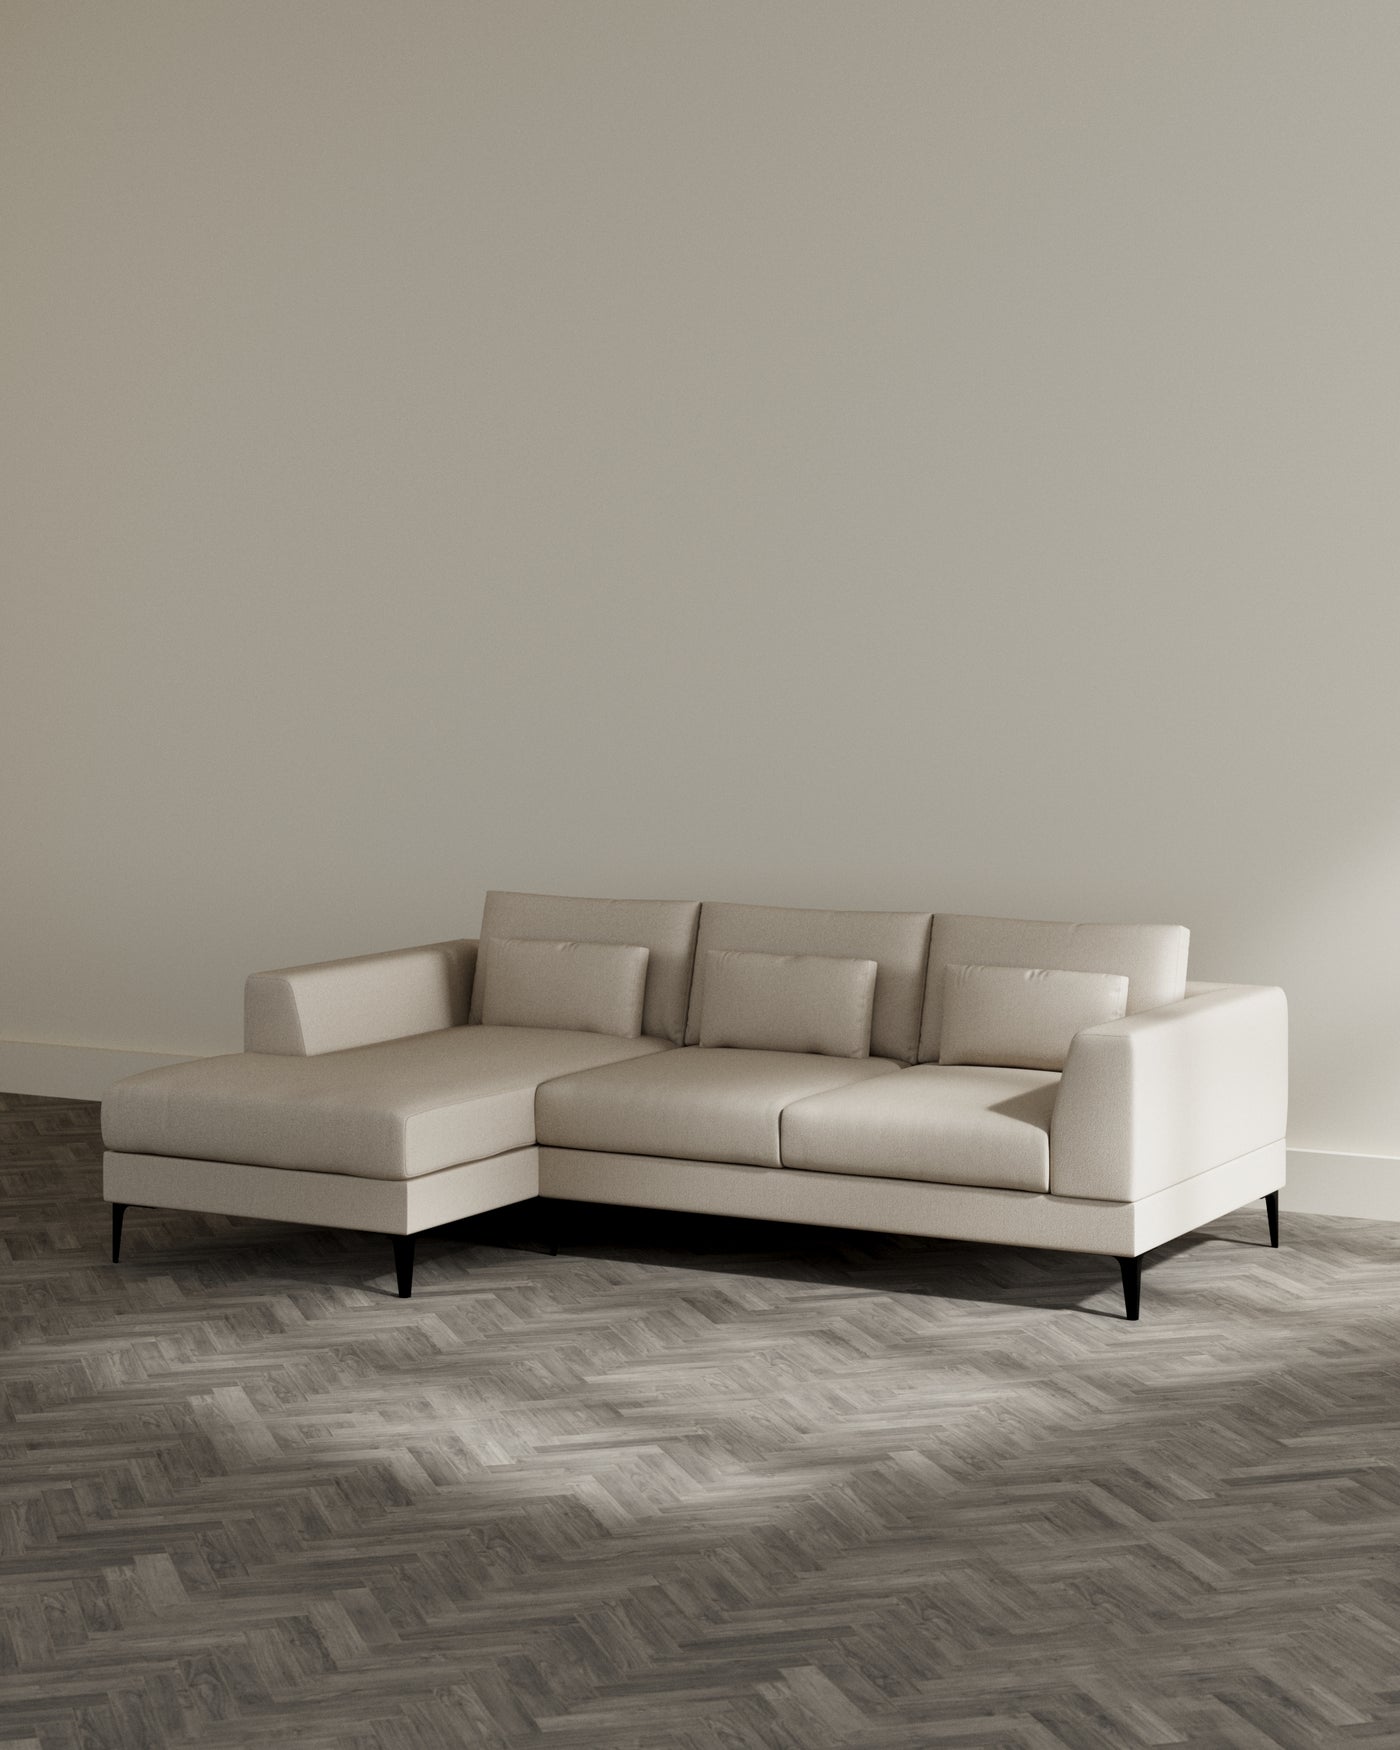 Modern L-shaped sectional sofa with a light beige fabric upholstery and sleek black legs, displayed in a minimalist setting with a herringbone patterned wooden floor.